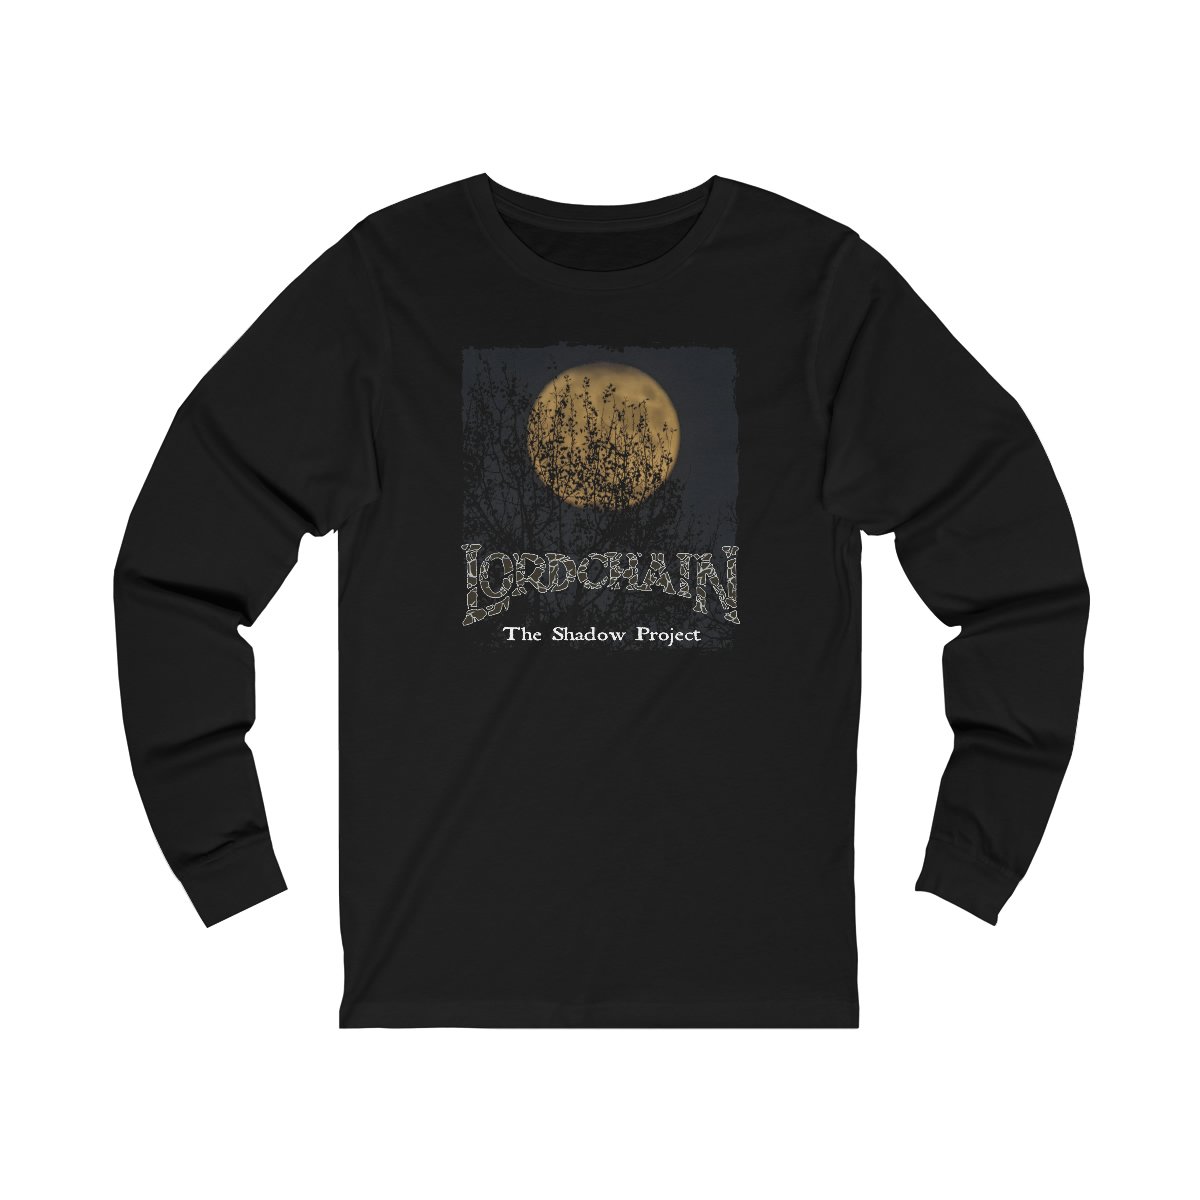 Lordchain – The Shadow Project Long Sleeve Tshirt